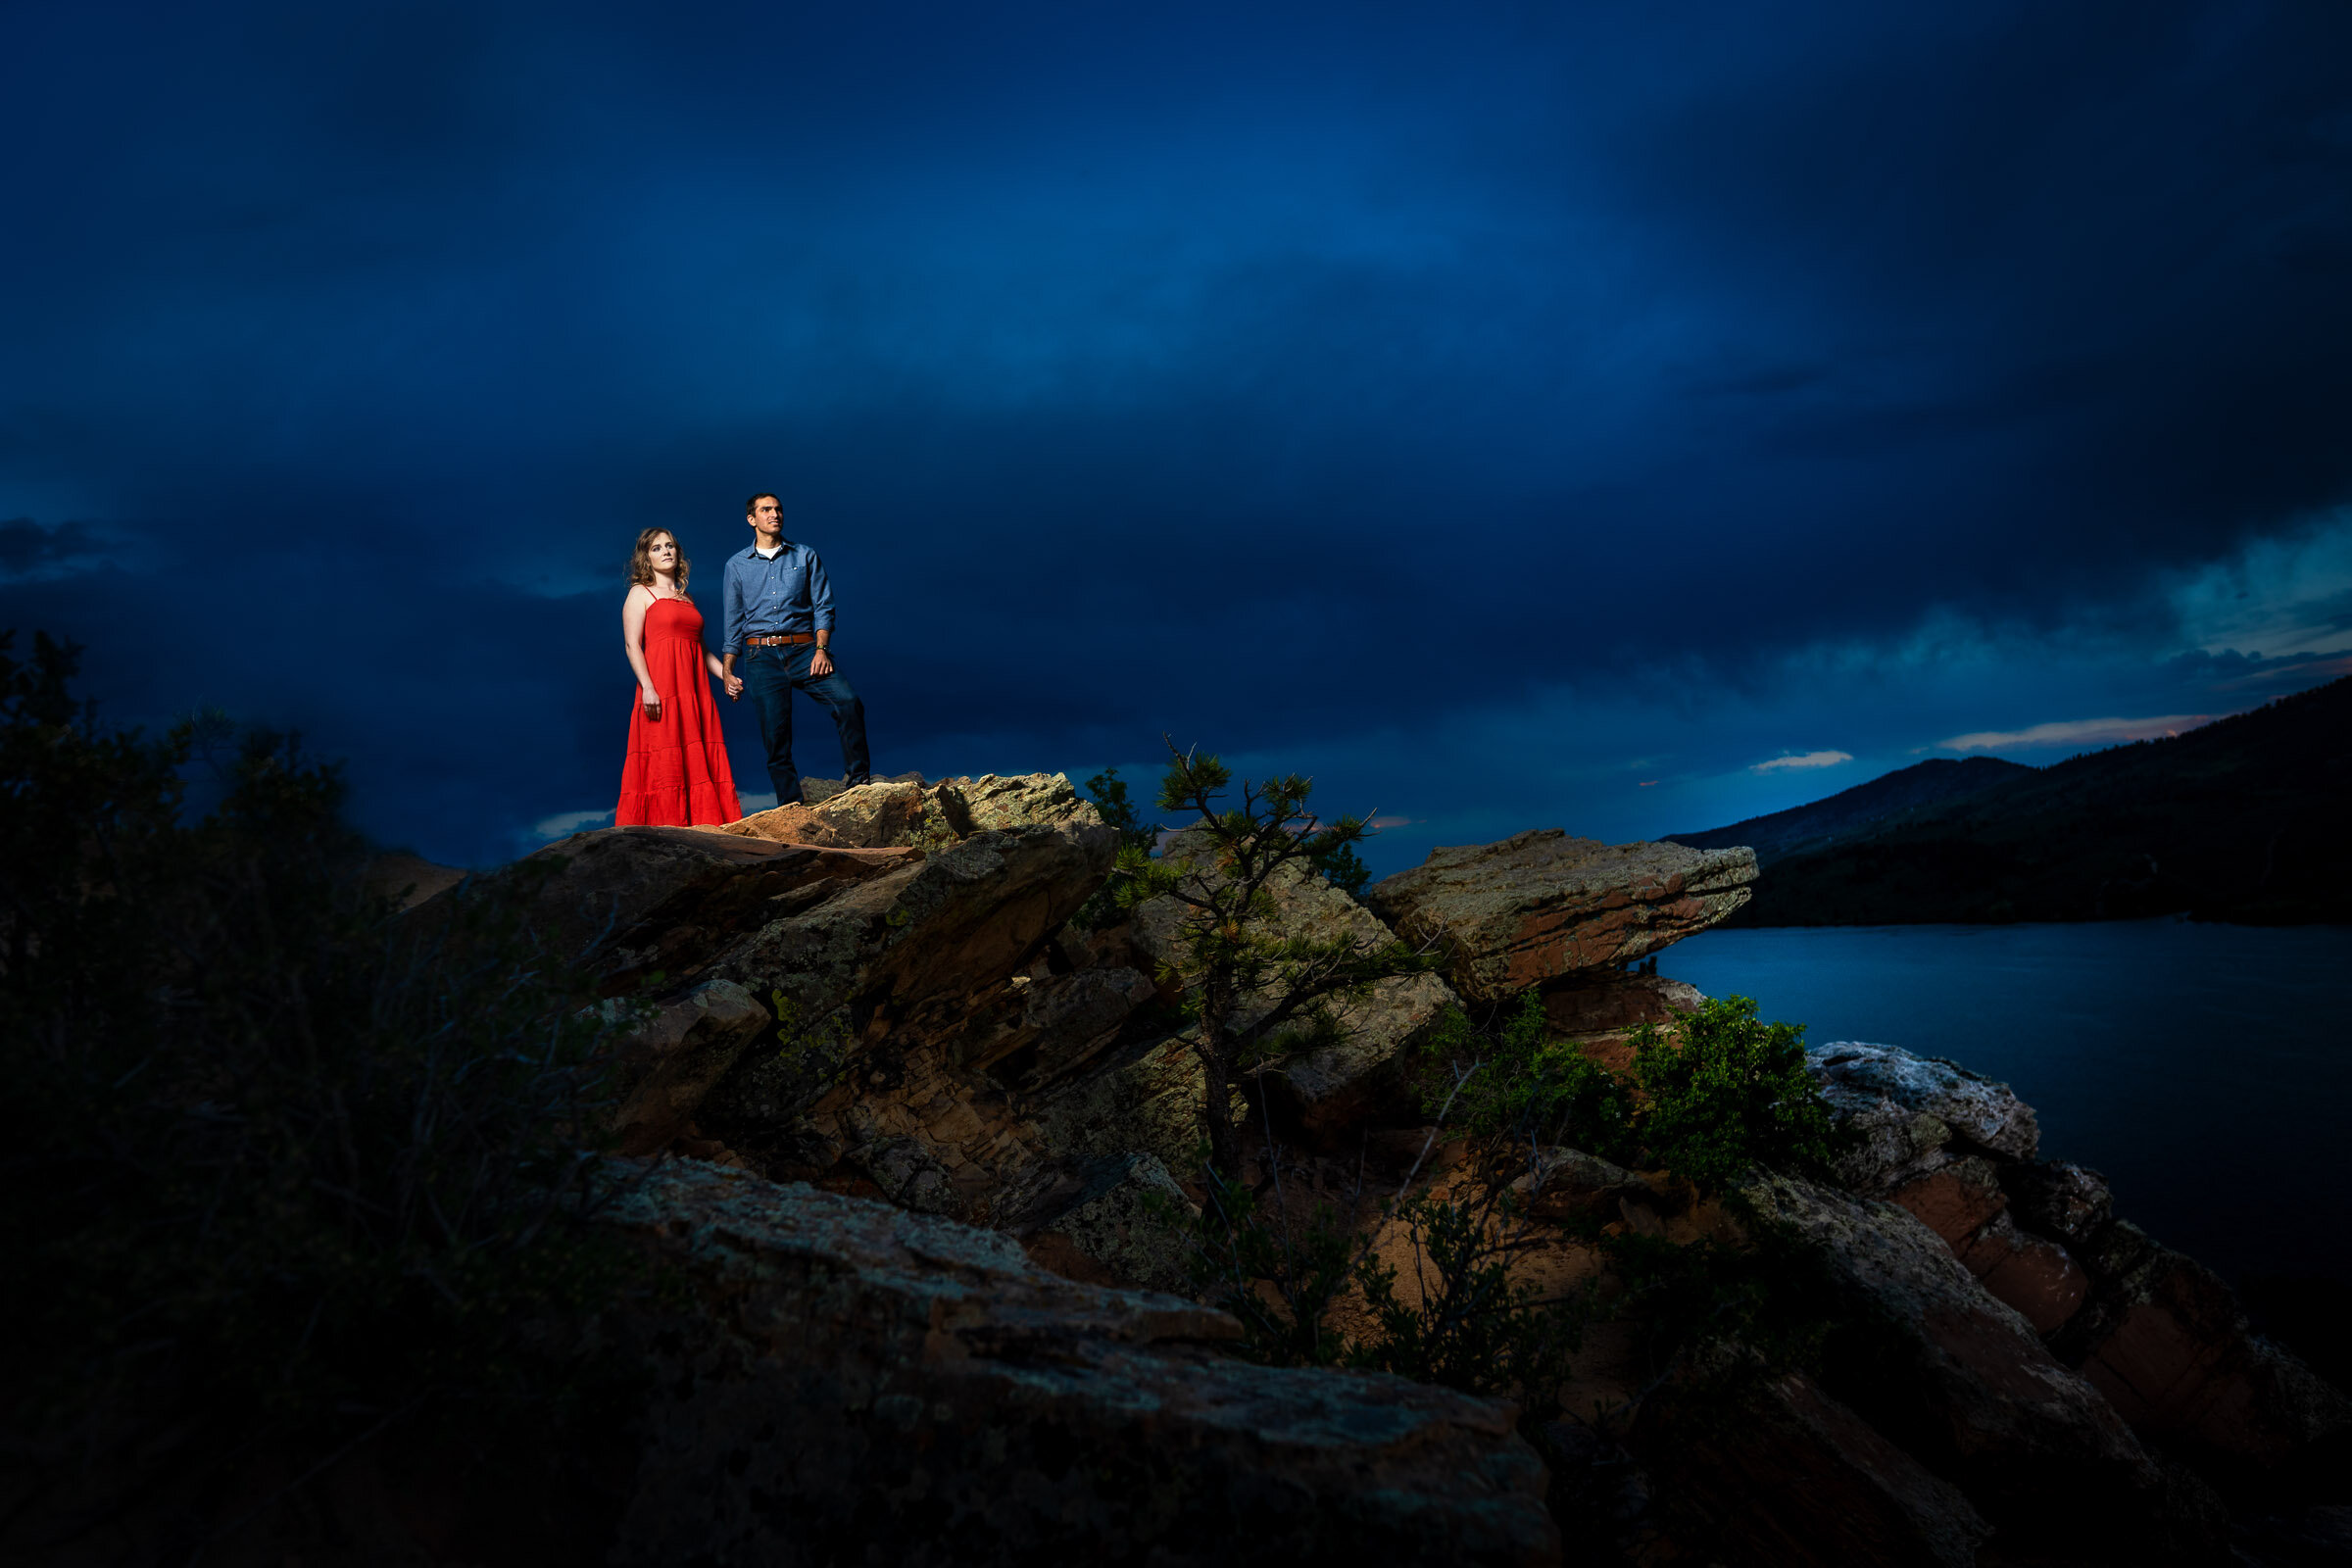 Engaged couple hold hands as they stand atop a rocky ledge overlooking the water during blue hour, Engagement Photos, Engagement Photo Inspiration, Engagement Photography, Engagement Photographer, Spring Engagement Photos, Fort Collins Engagement Photos, Fort Collins engagement photos, Fort Collins engagement photography, Fort Collins engagement photographer, Colorado engagement photos, Colorado engagement photography, Colorado engagement inspiration, Horsetooth Reservoir Engagement